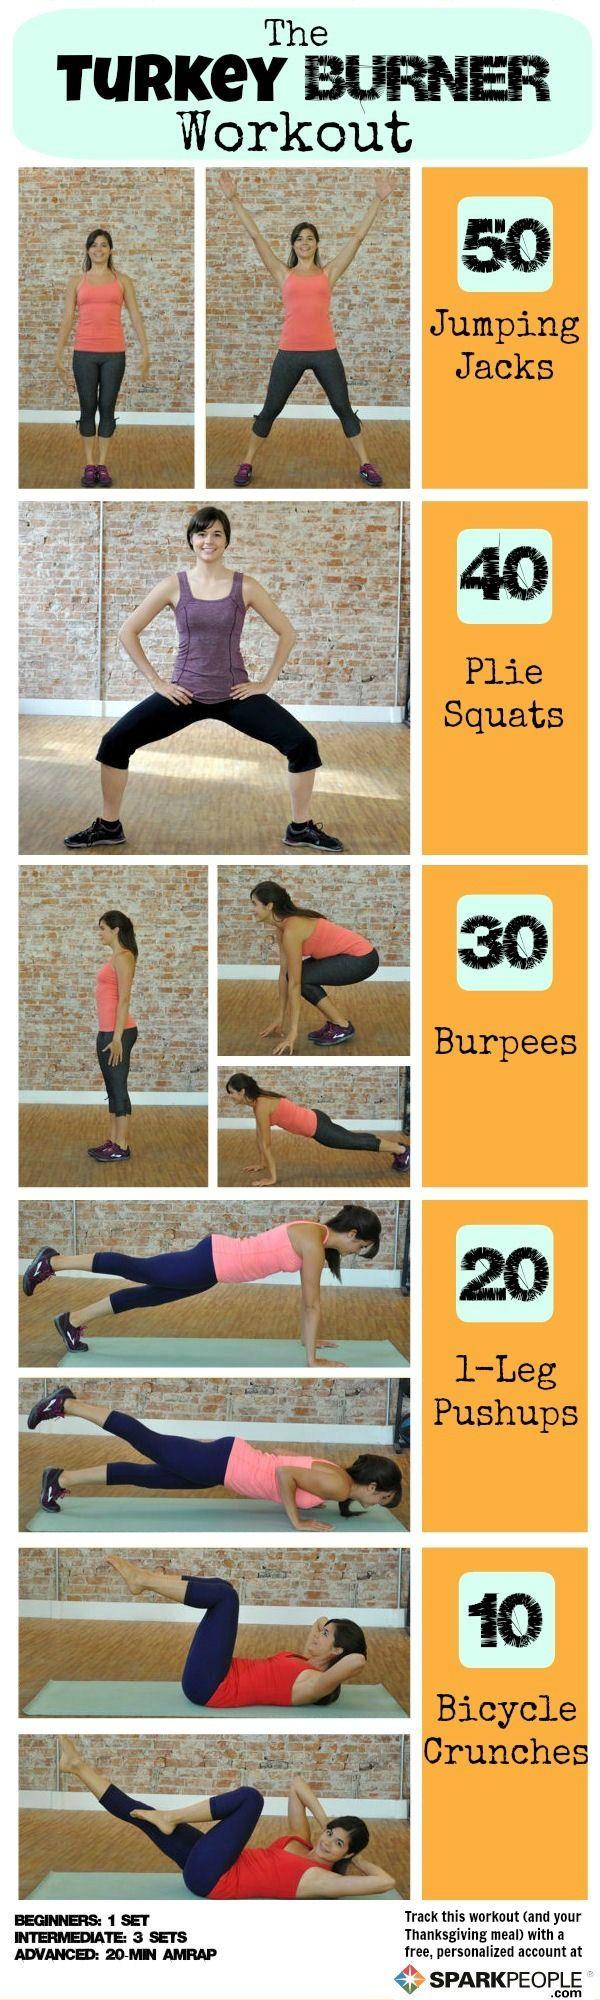 Wedding - Torch Calories With The Turkey Burner Workout!